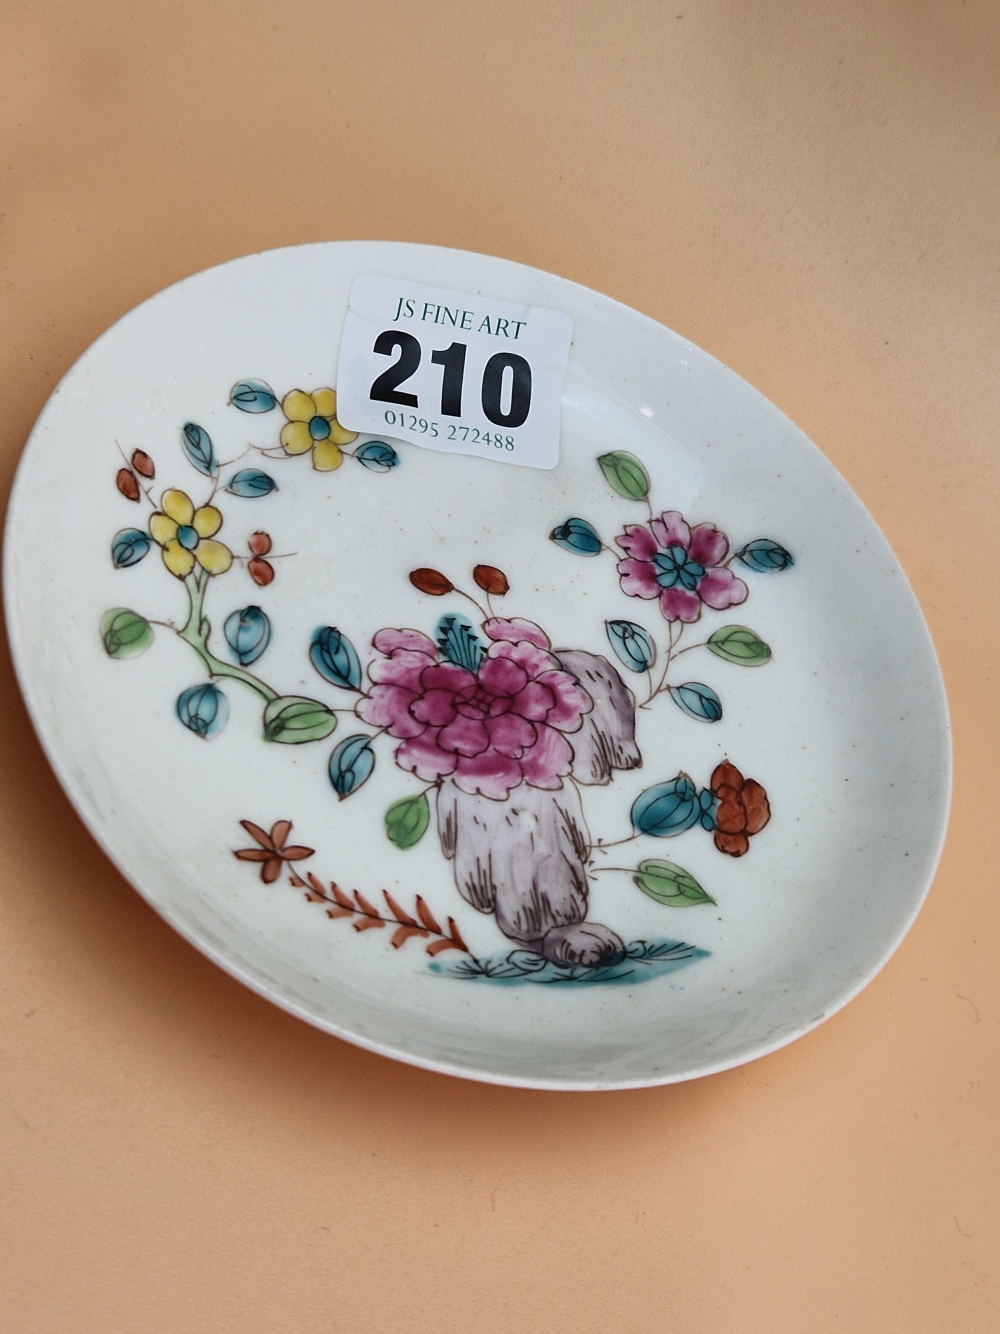 A BOW PORCELAIN COFFEE CUP AND SAUCER PAINTED WITH FLOWERS GROWING BY ROCKS - Image 4 of 6